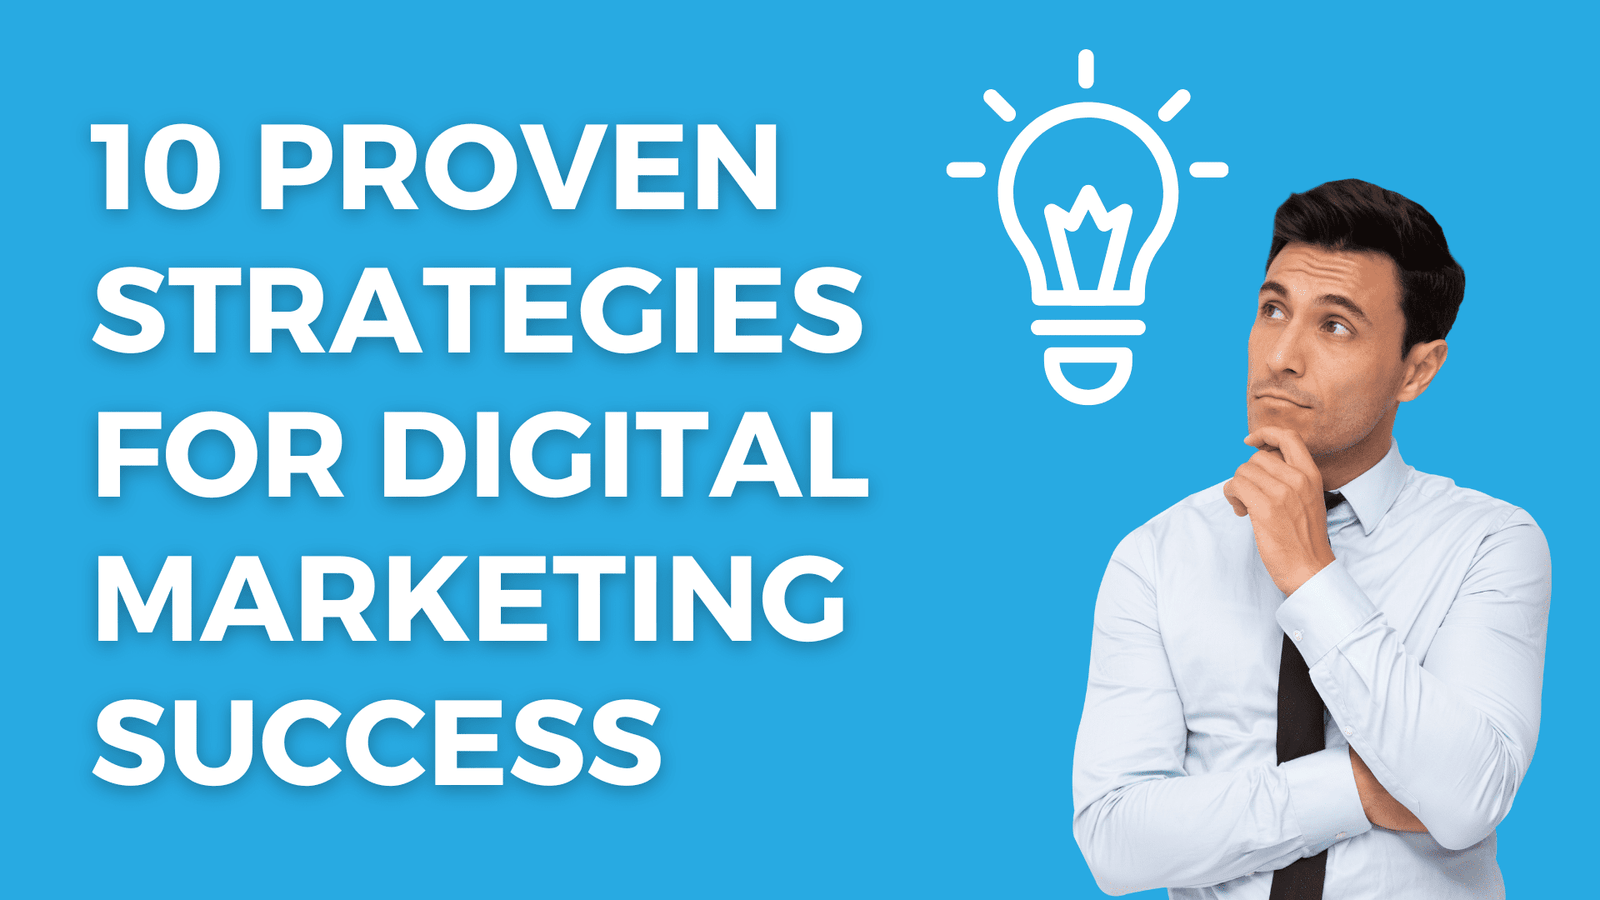 10 Proven Strategies for Digital Marketing Success | Expert Tips and Advice